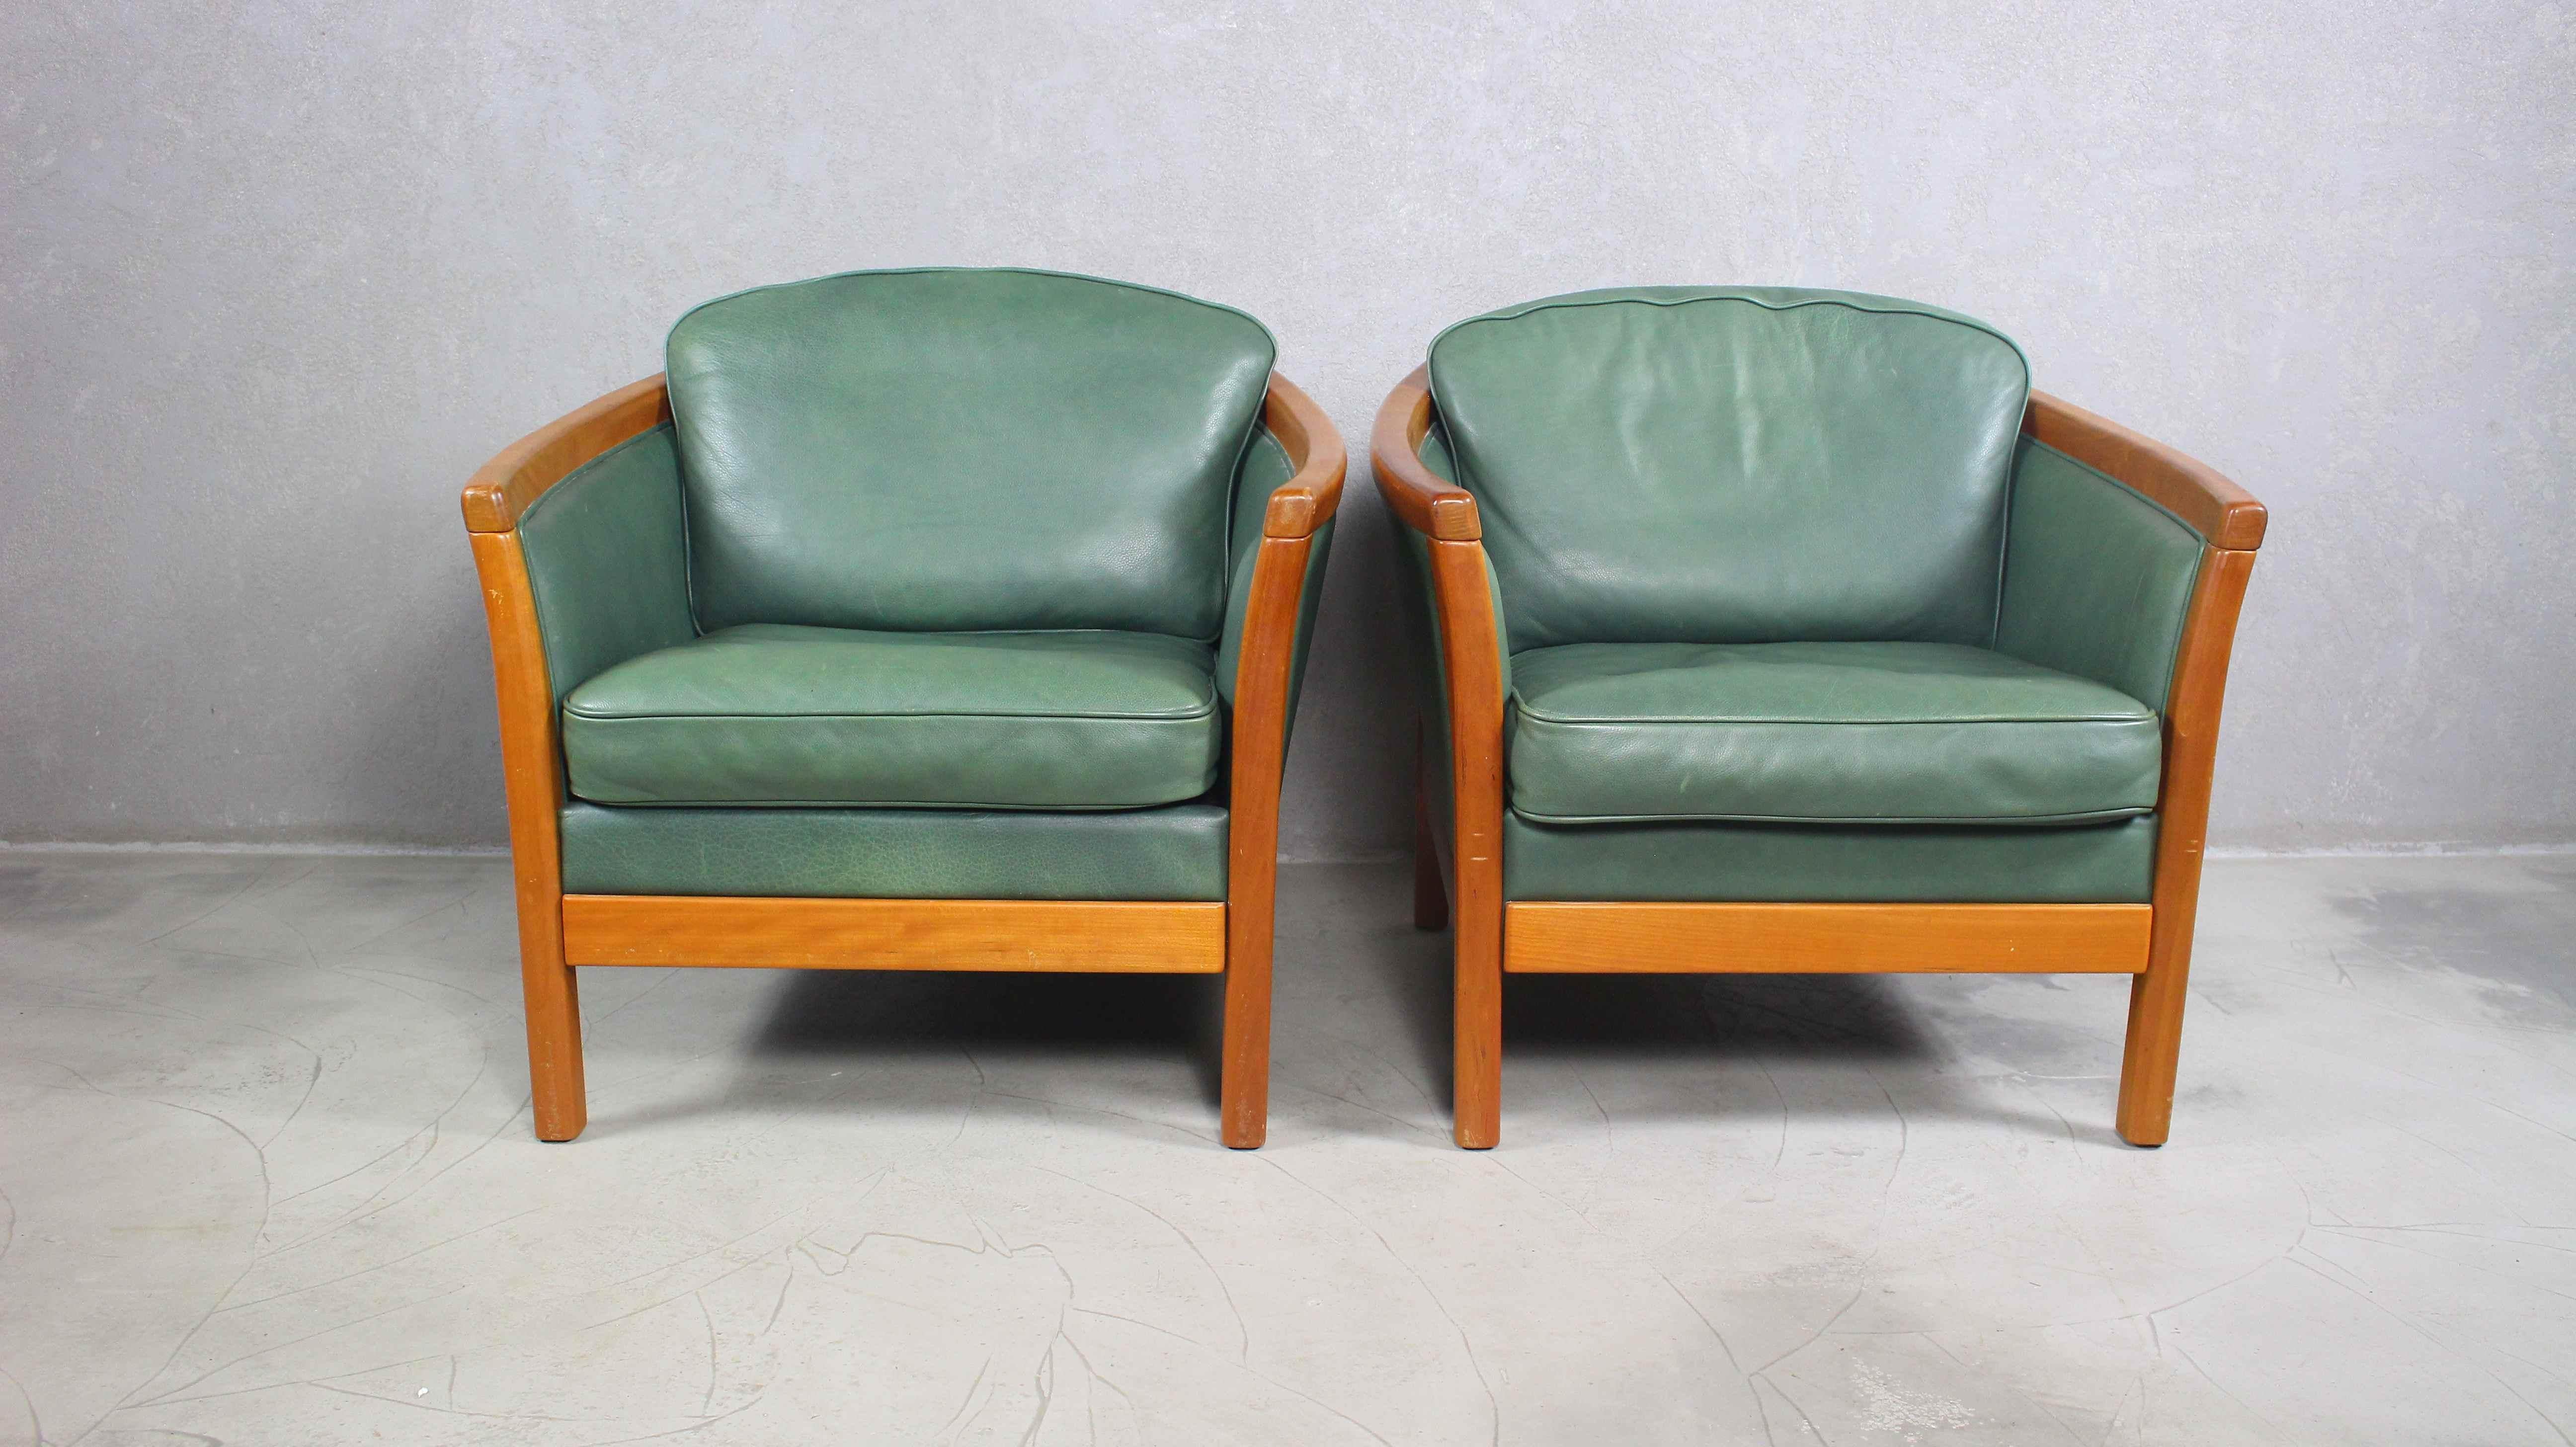 Pair of vintage green leather chairs.
Design Mogens Hansen.
Produced in Denmark during 1980s/90s.
Made of of solid cherry wood and high-quality natural leather in bottle green color.